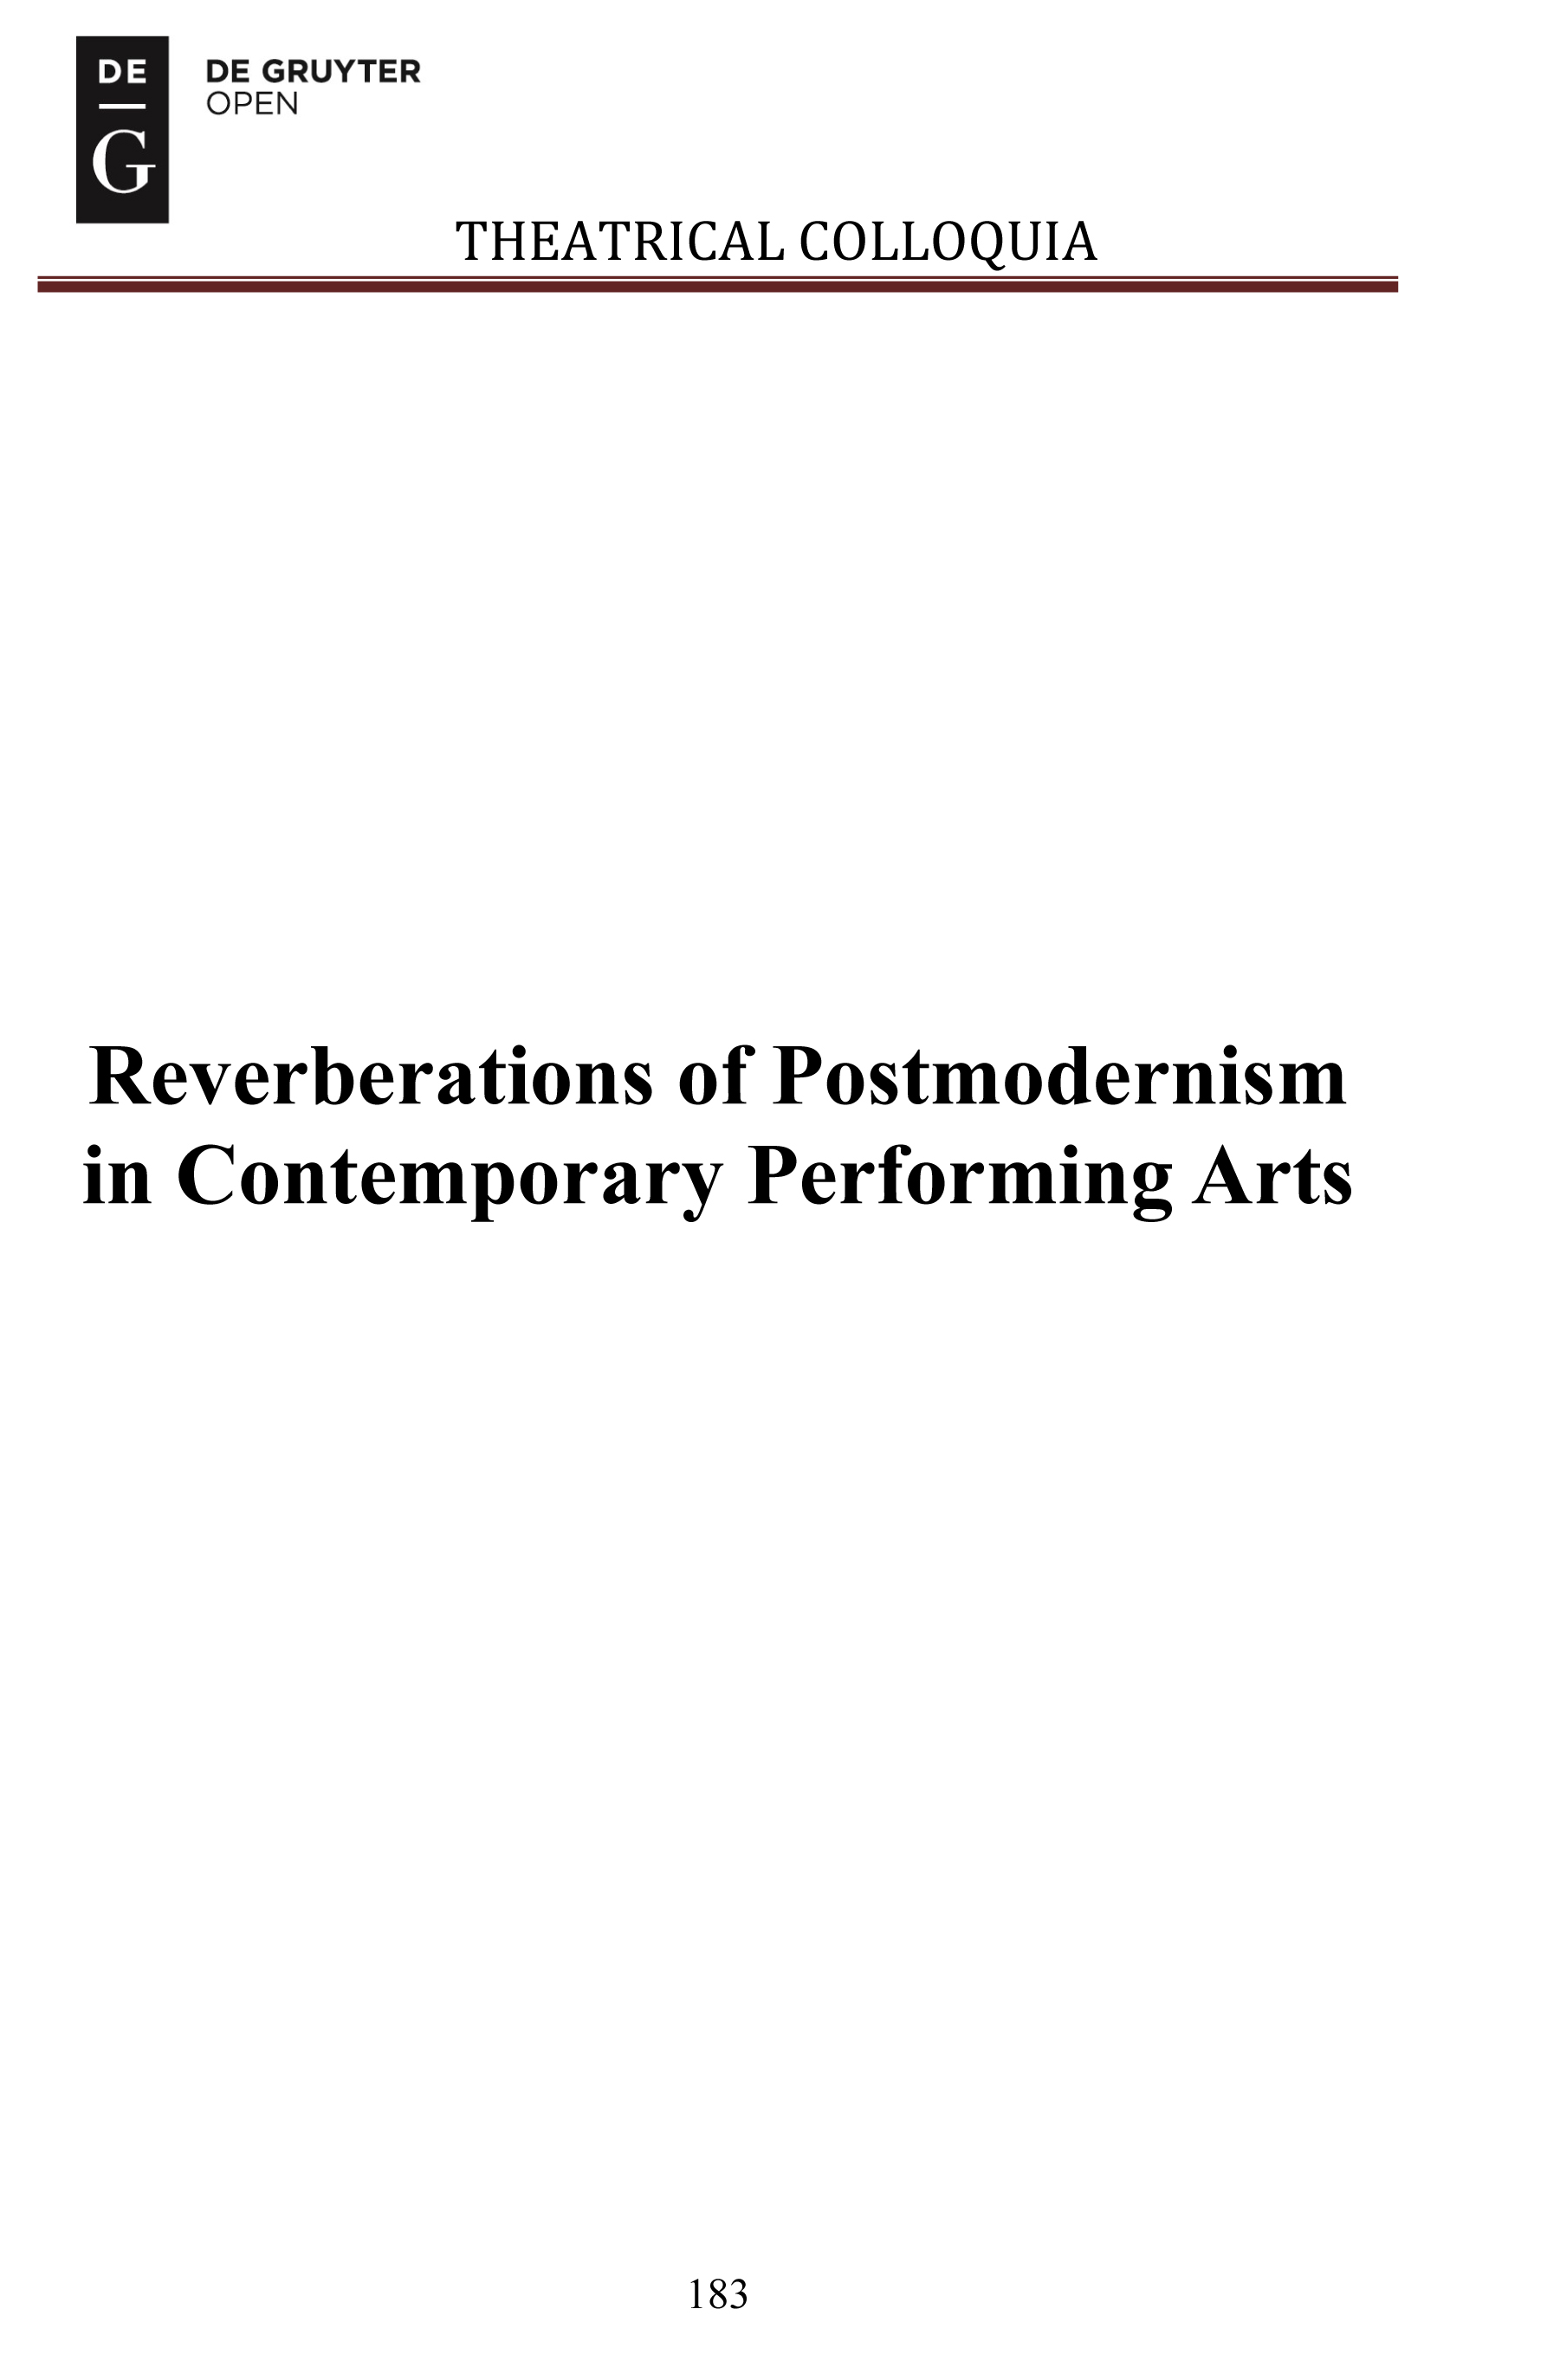 Theatre Performance in Postmodernism